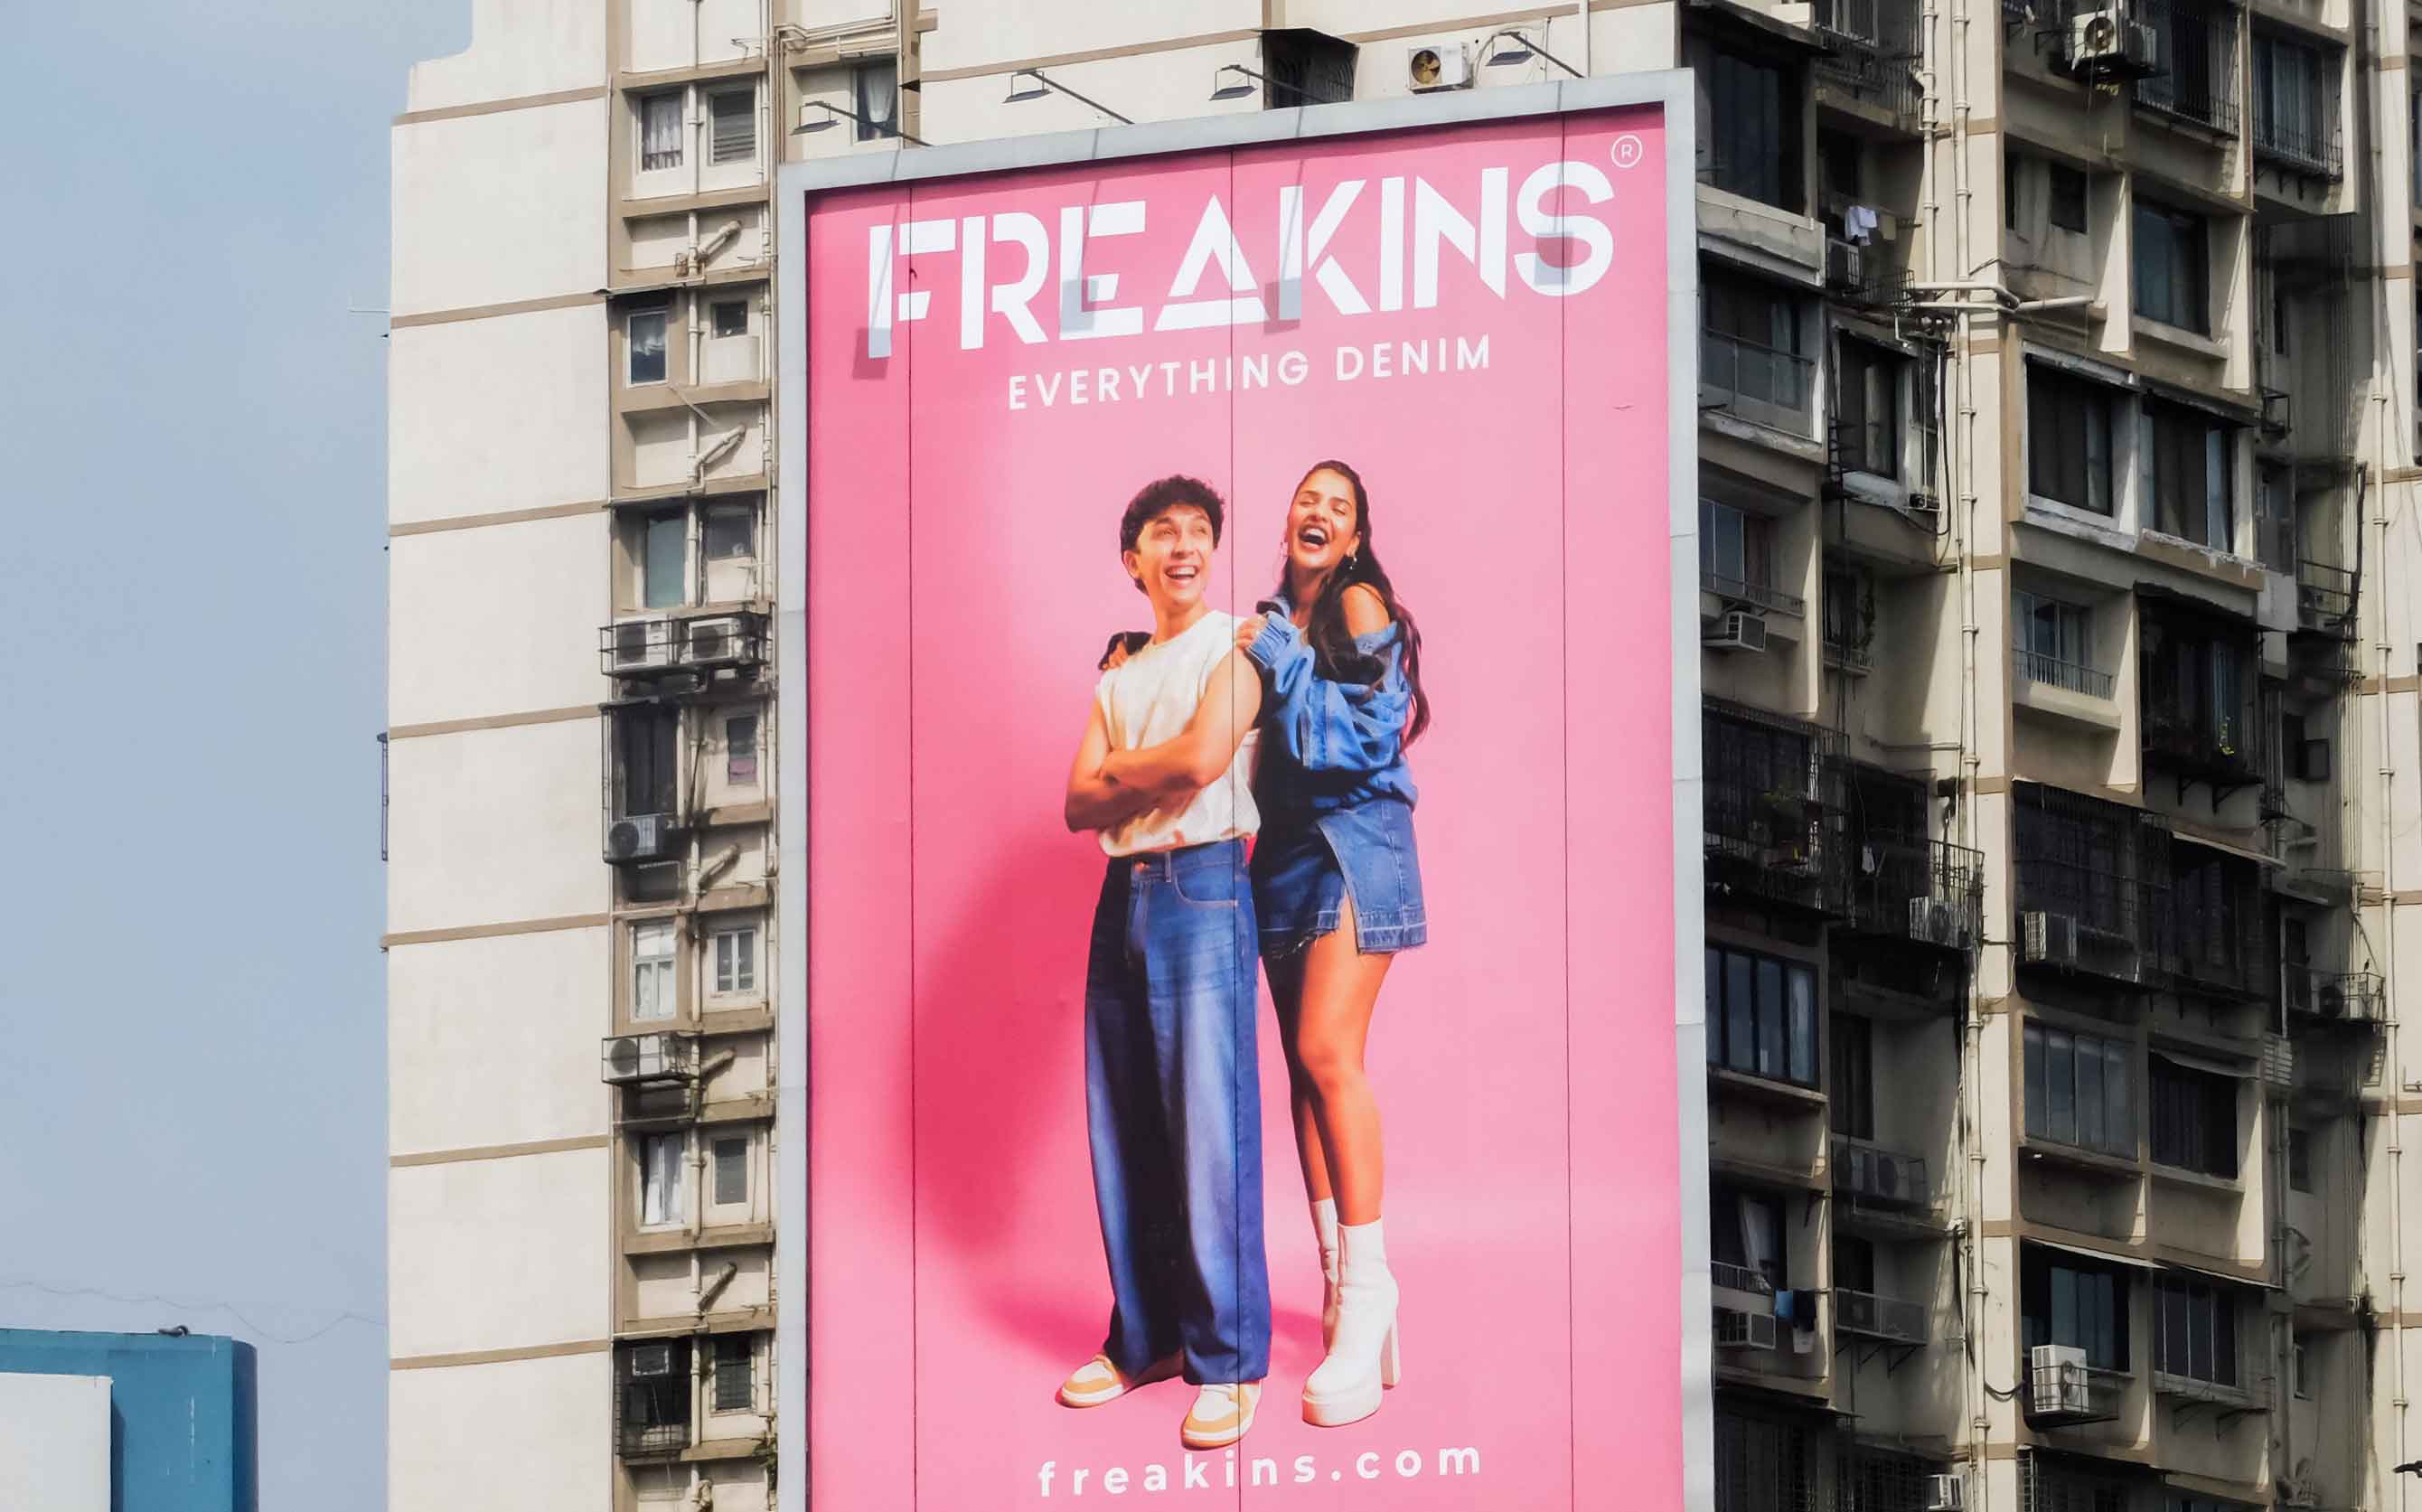 Freakins jeans combines influencer marketing with OOH for latest campaign